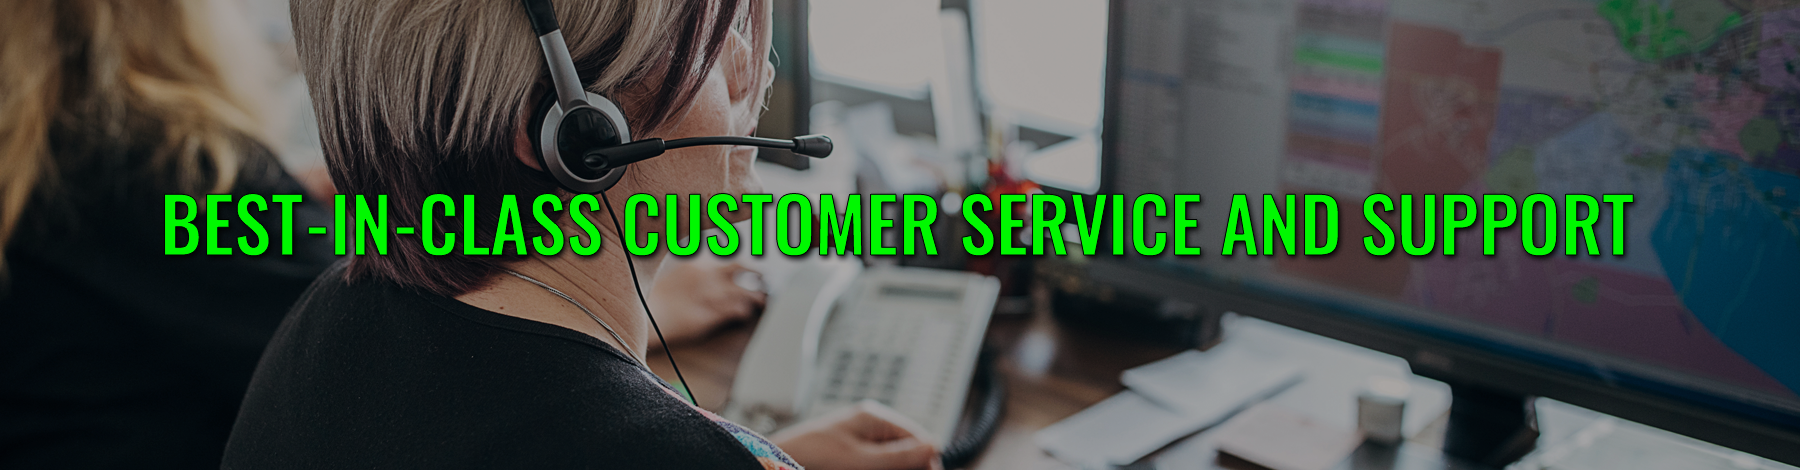 Best-in-class Customer Service and Support